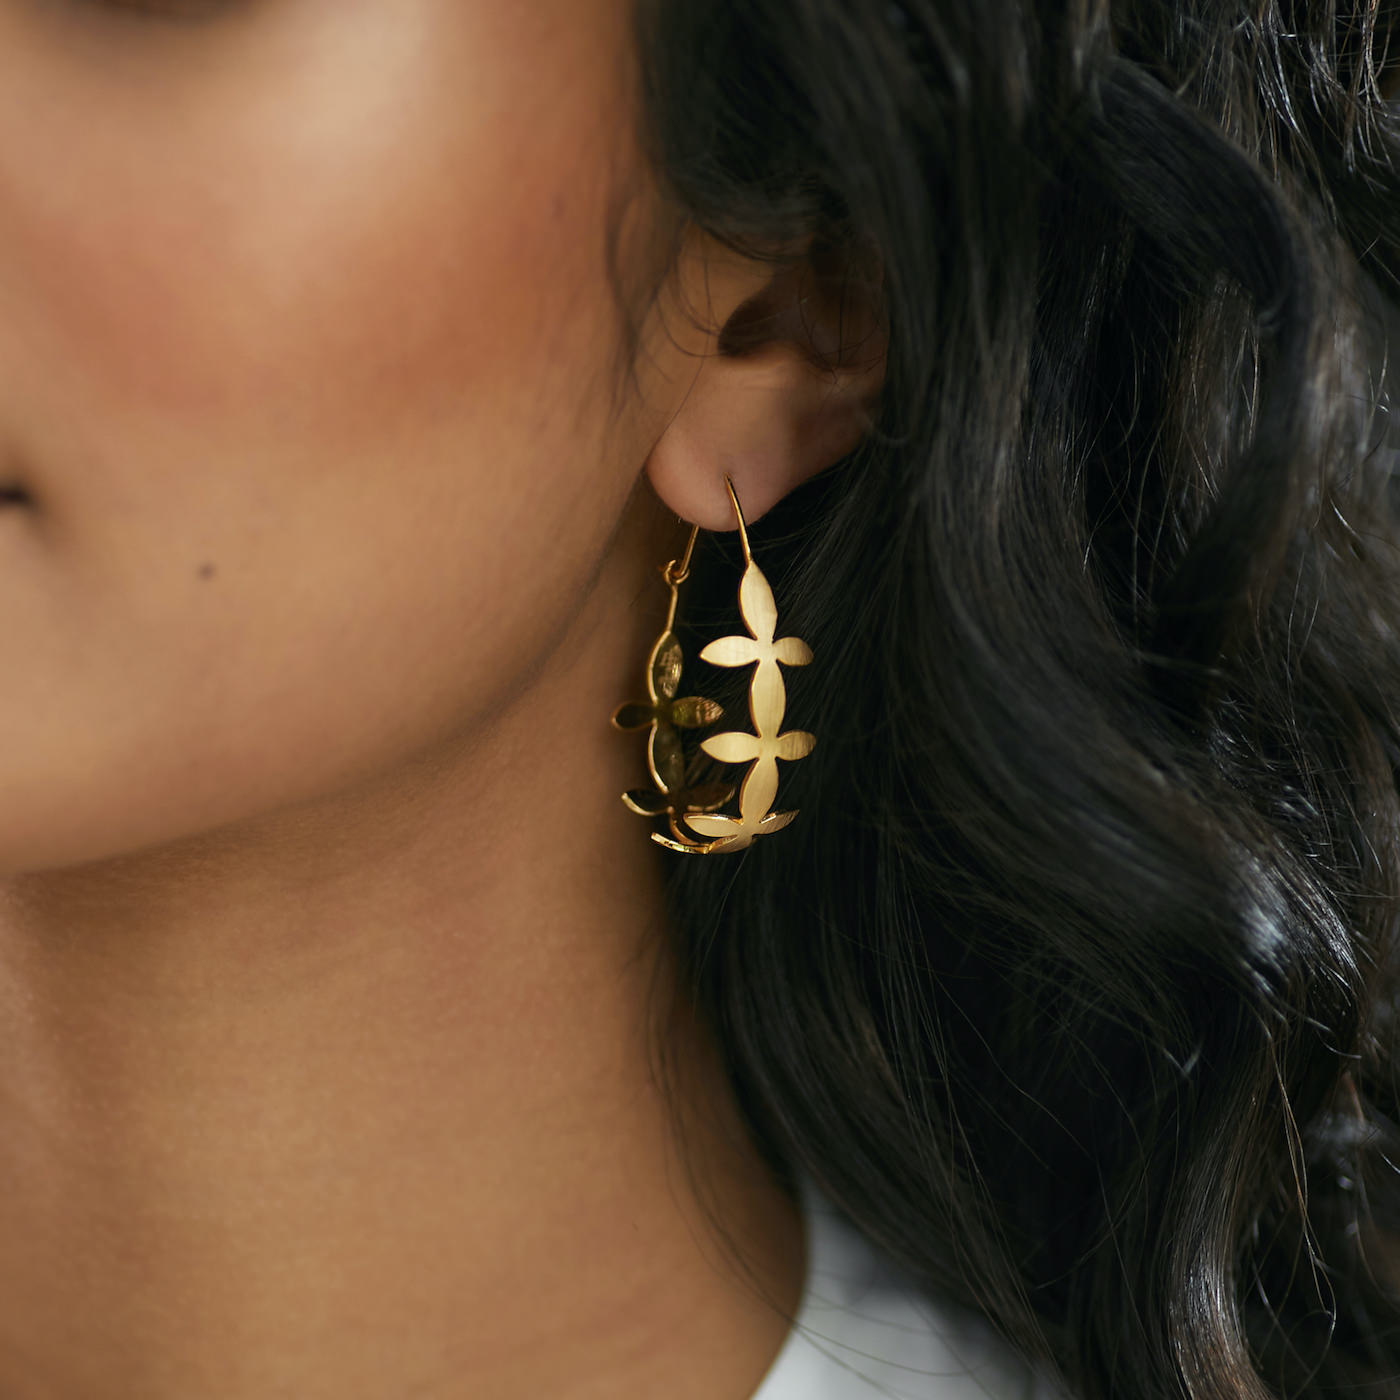 Side view of Brave Edith Thanaka Leaf Teardrop hoops in gold vermeil on white background